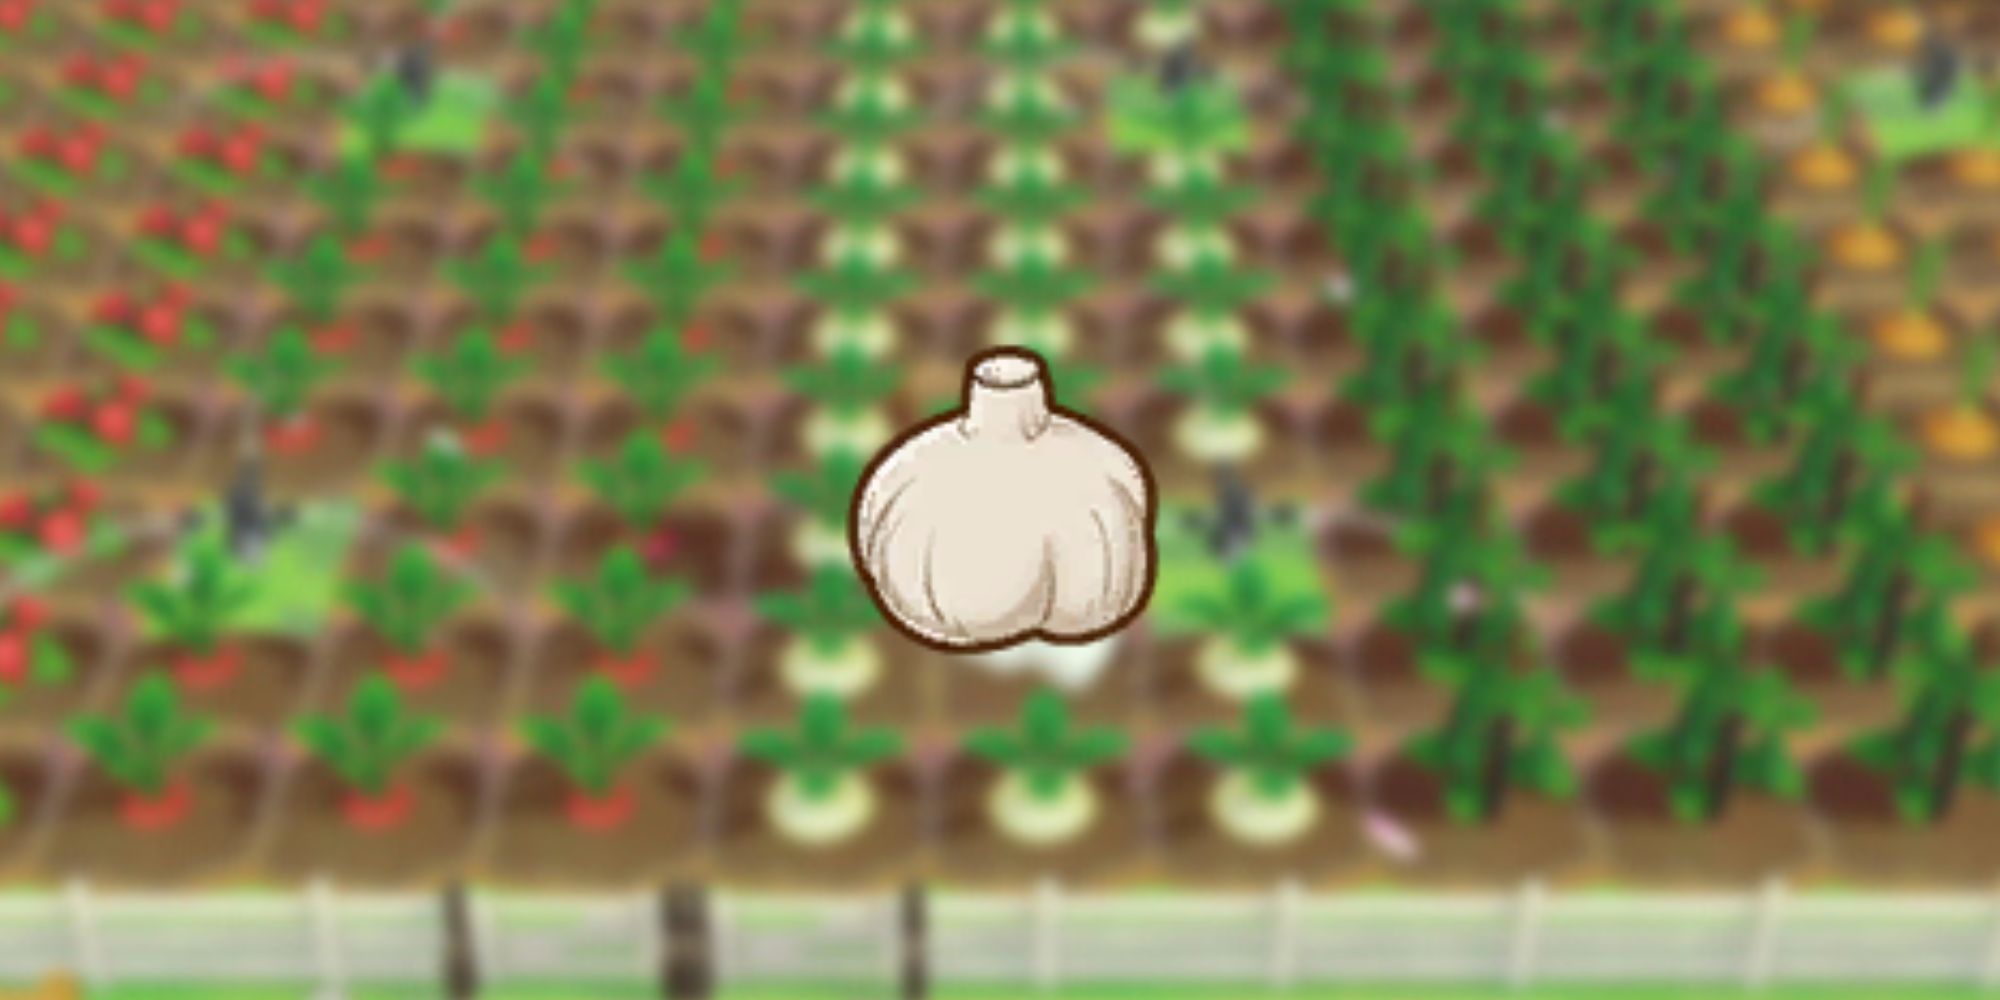 Garlic as it would be seen in players inventory over blurred background of crops in game